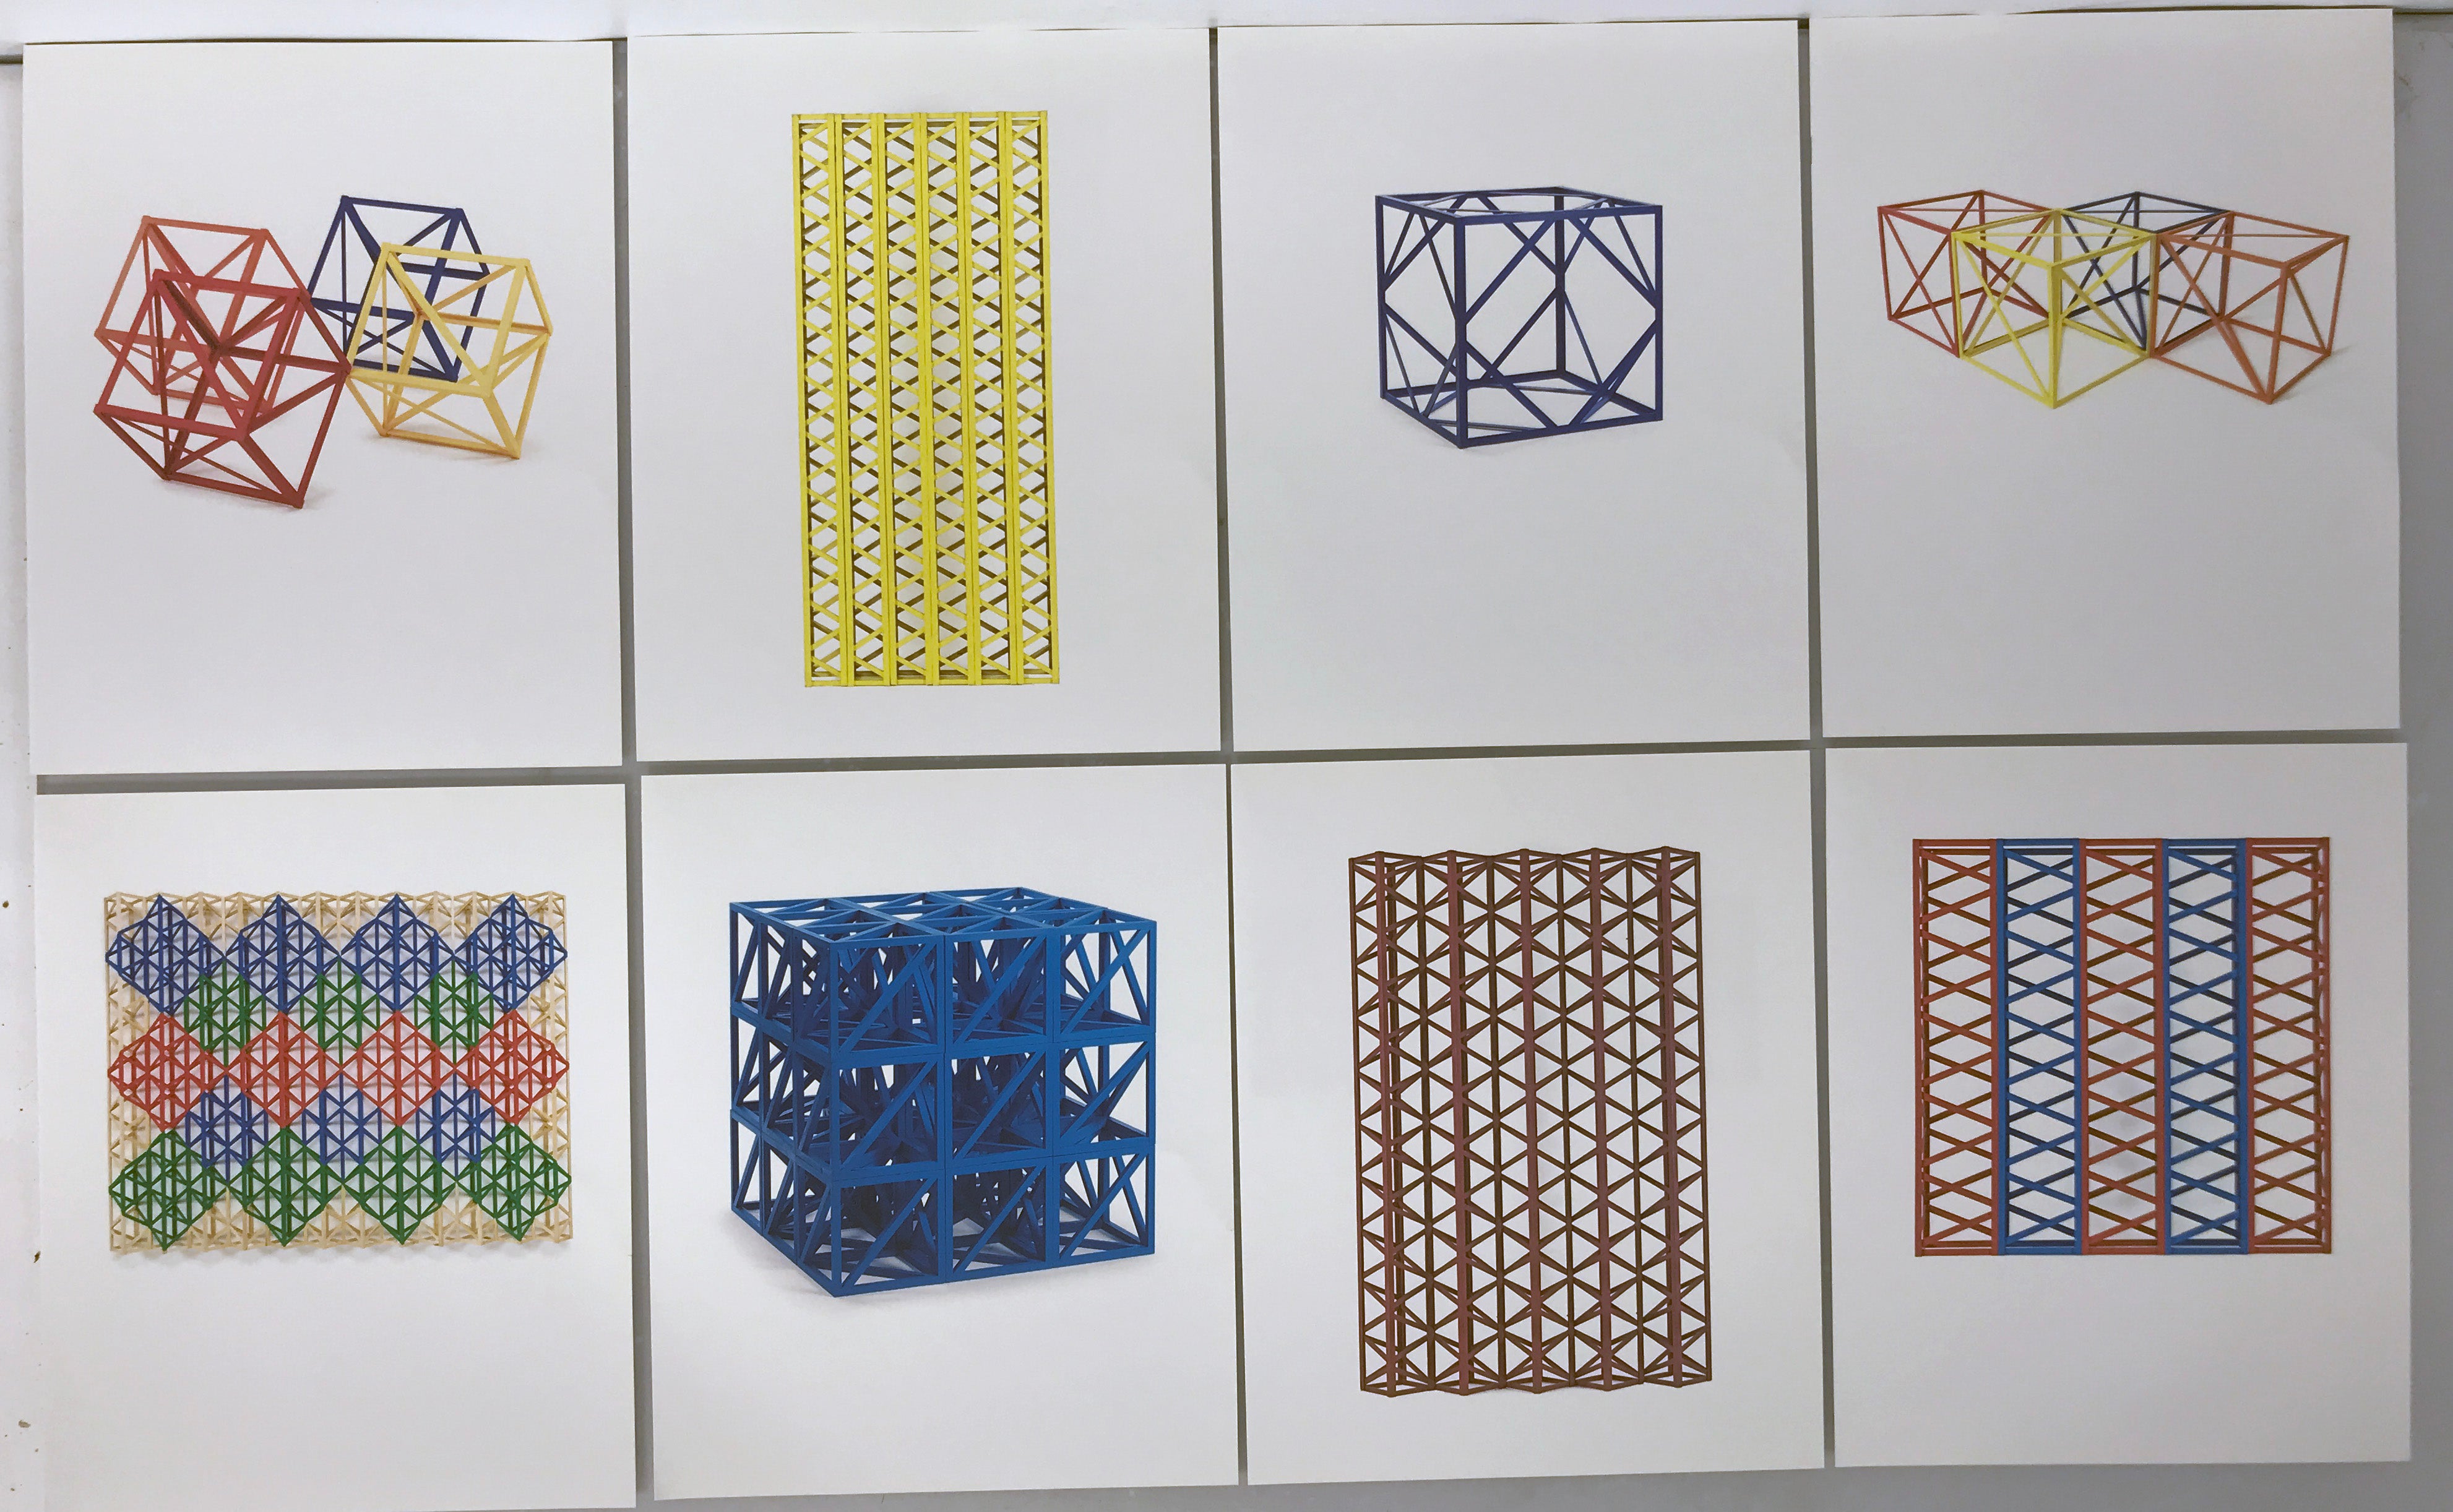 Set of Prints from Rasheed Araeen's "Going East"